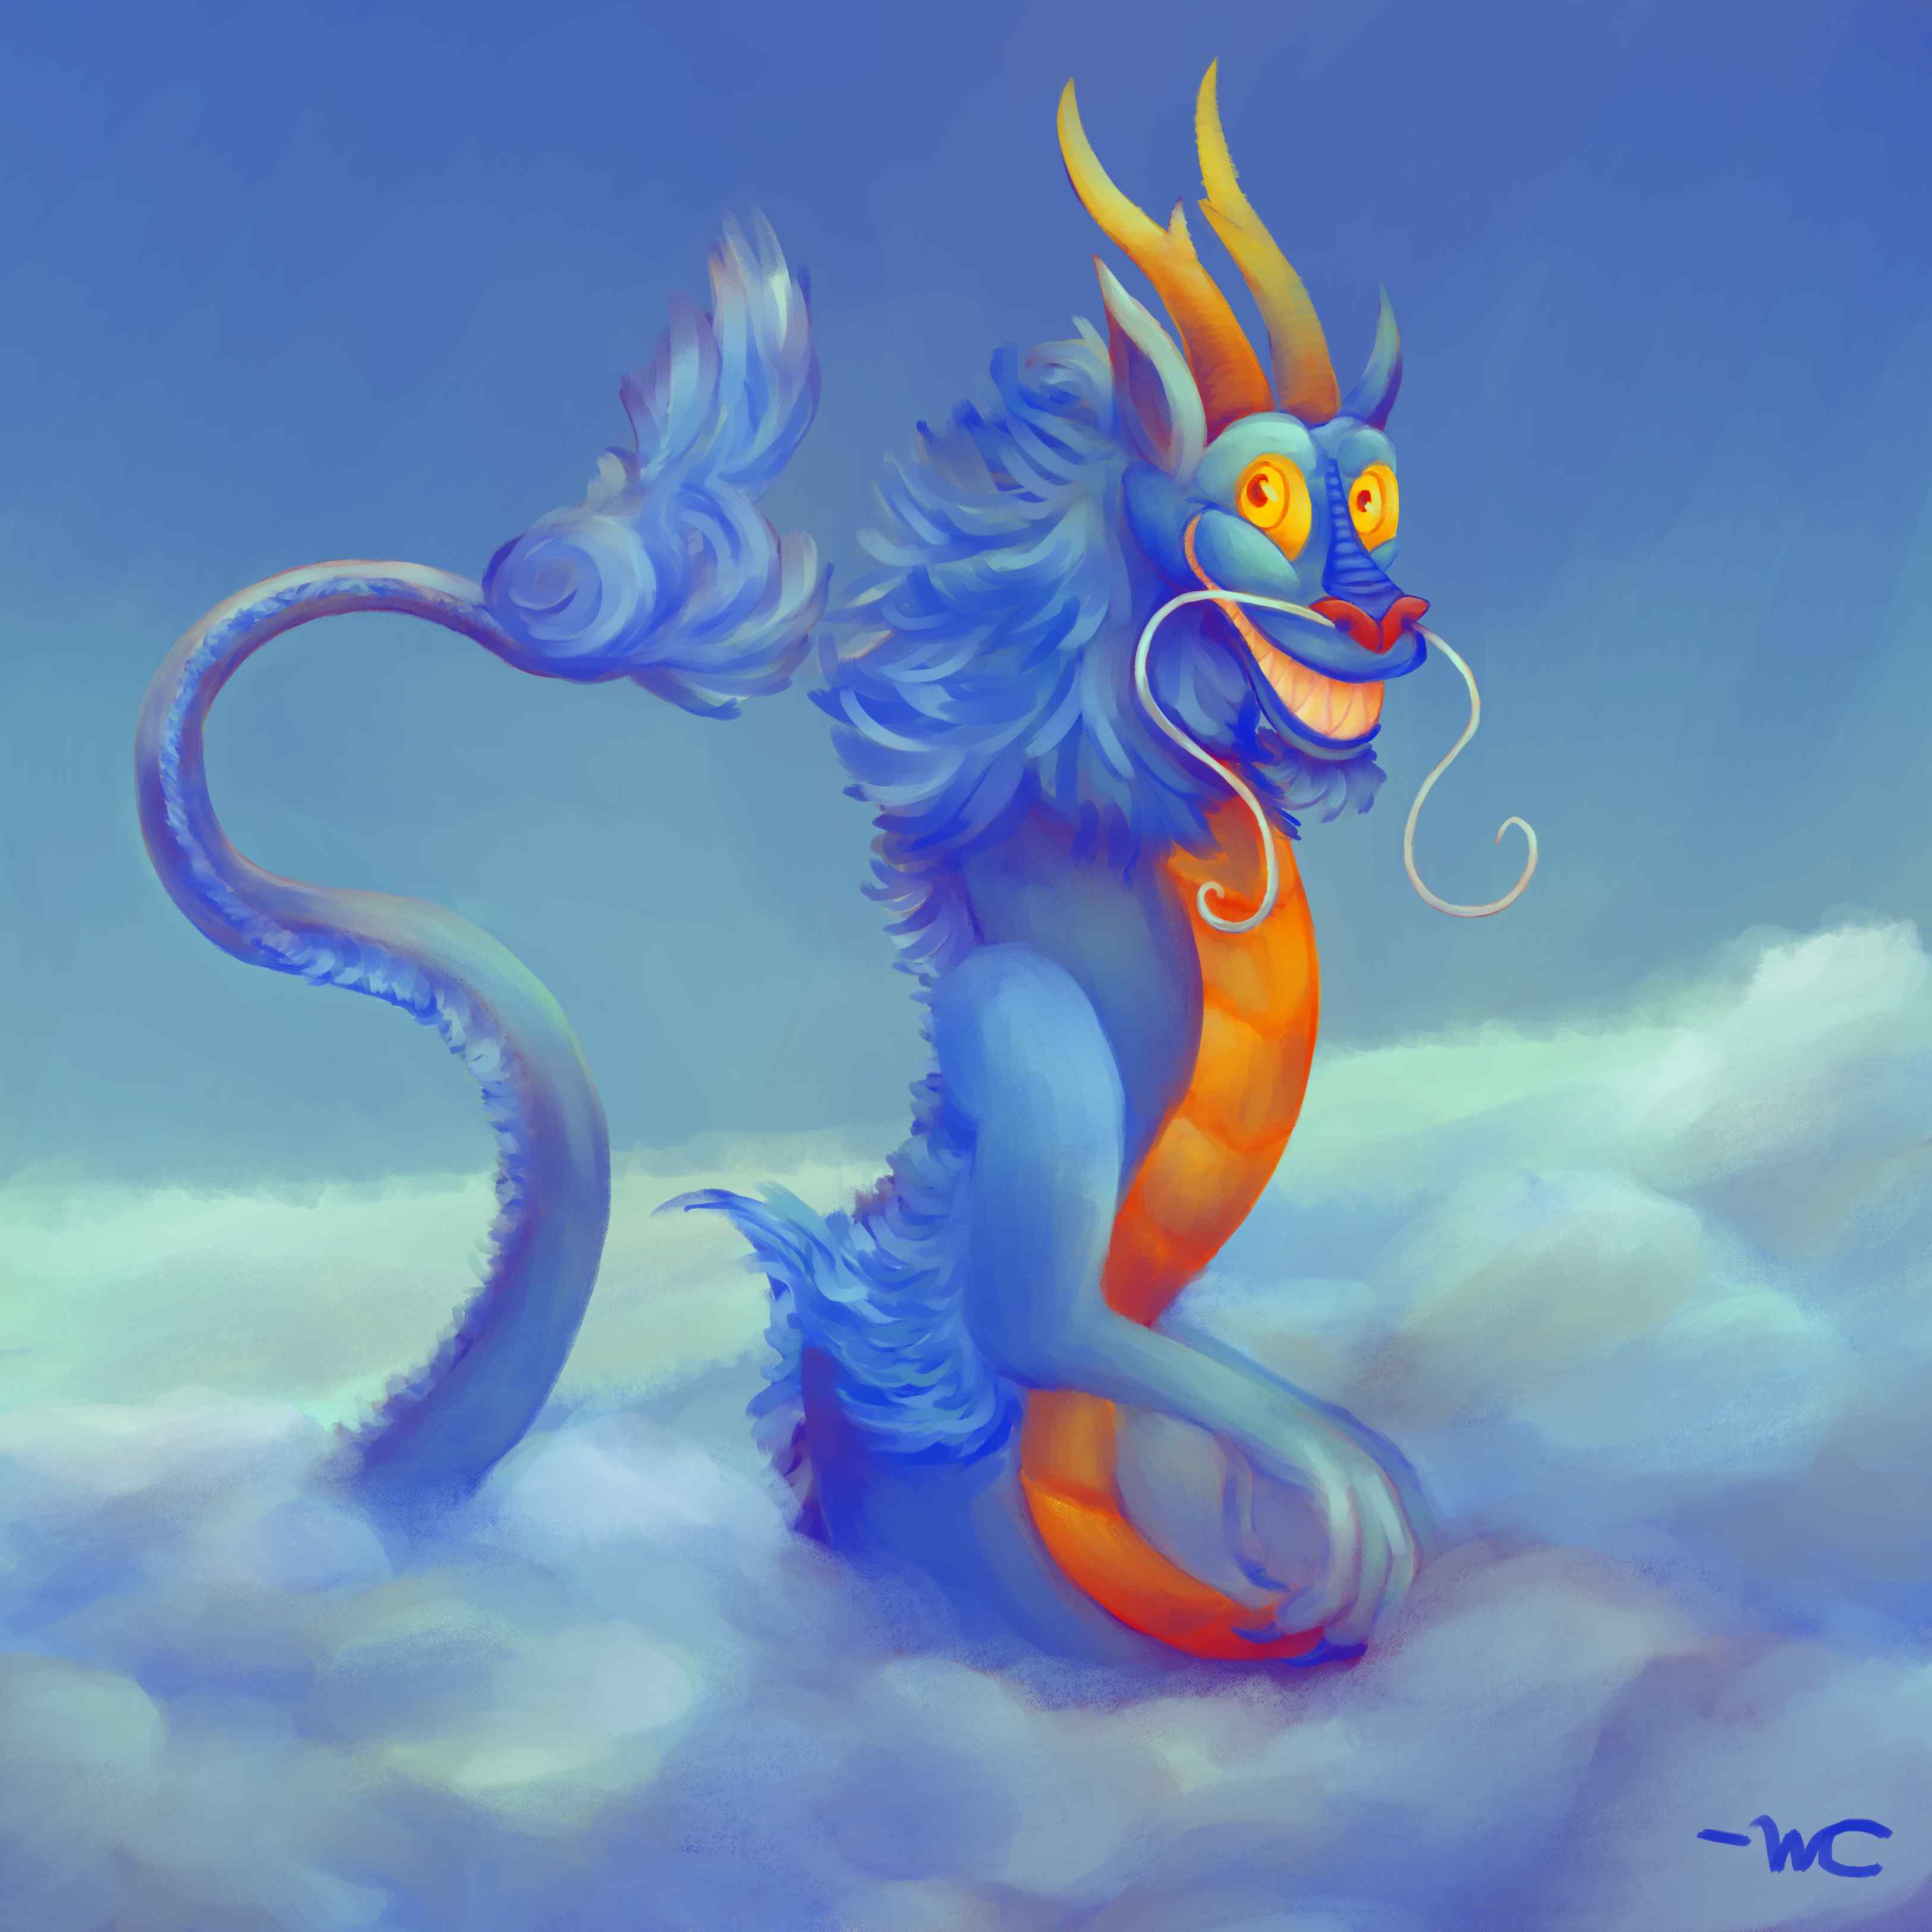 A digital painting of a blue and yellow eastern dragon sitting above the clouds. It has a large grin on its face.